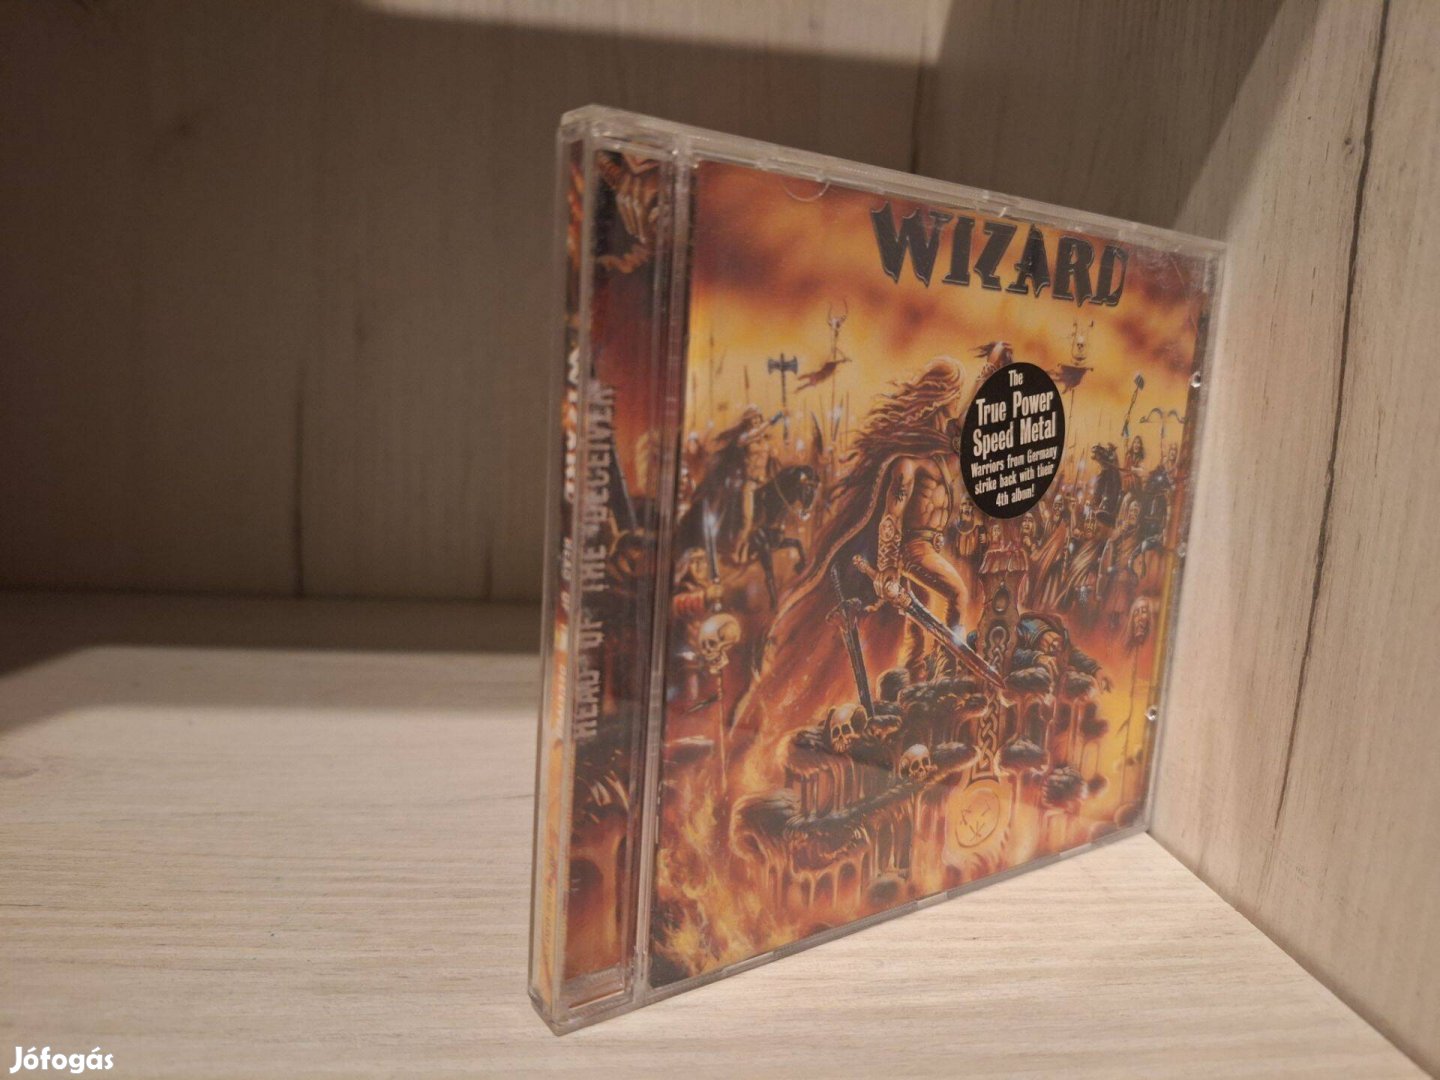 Wizard - Head Of The Deceiver CD